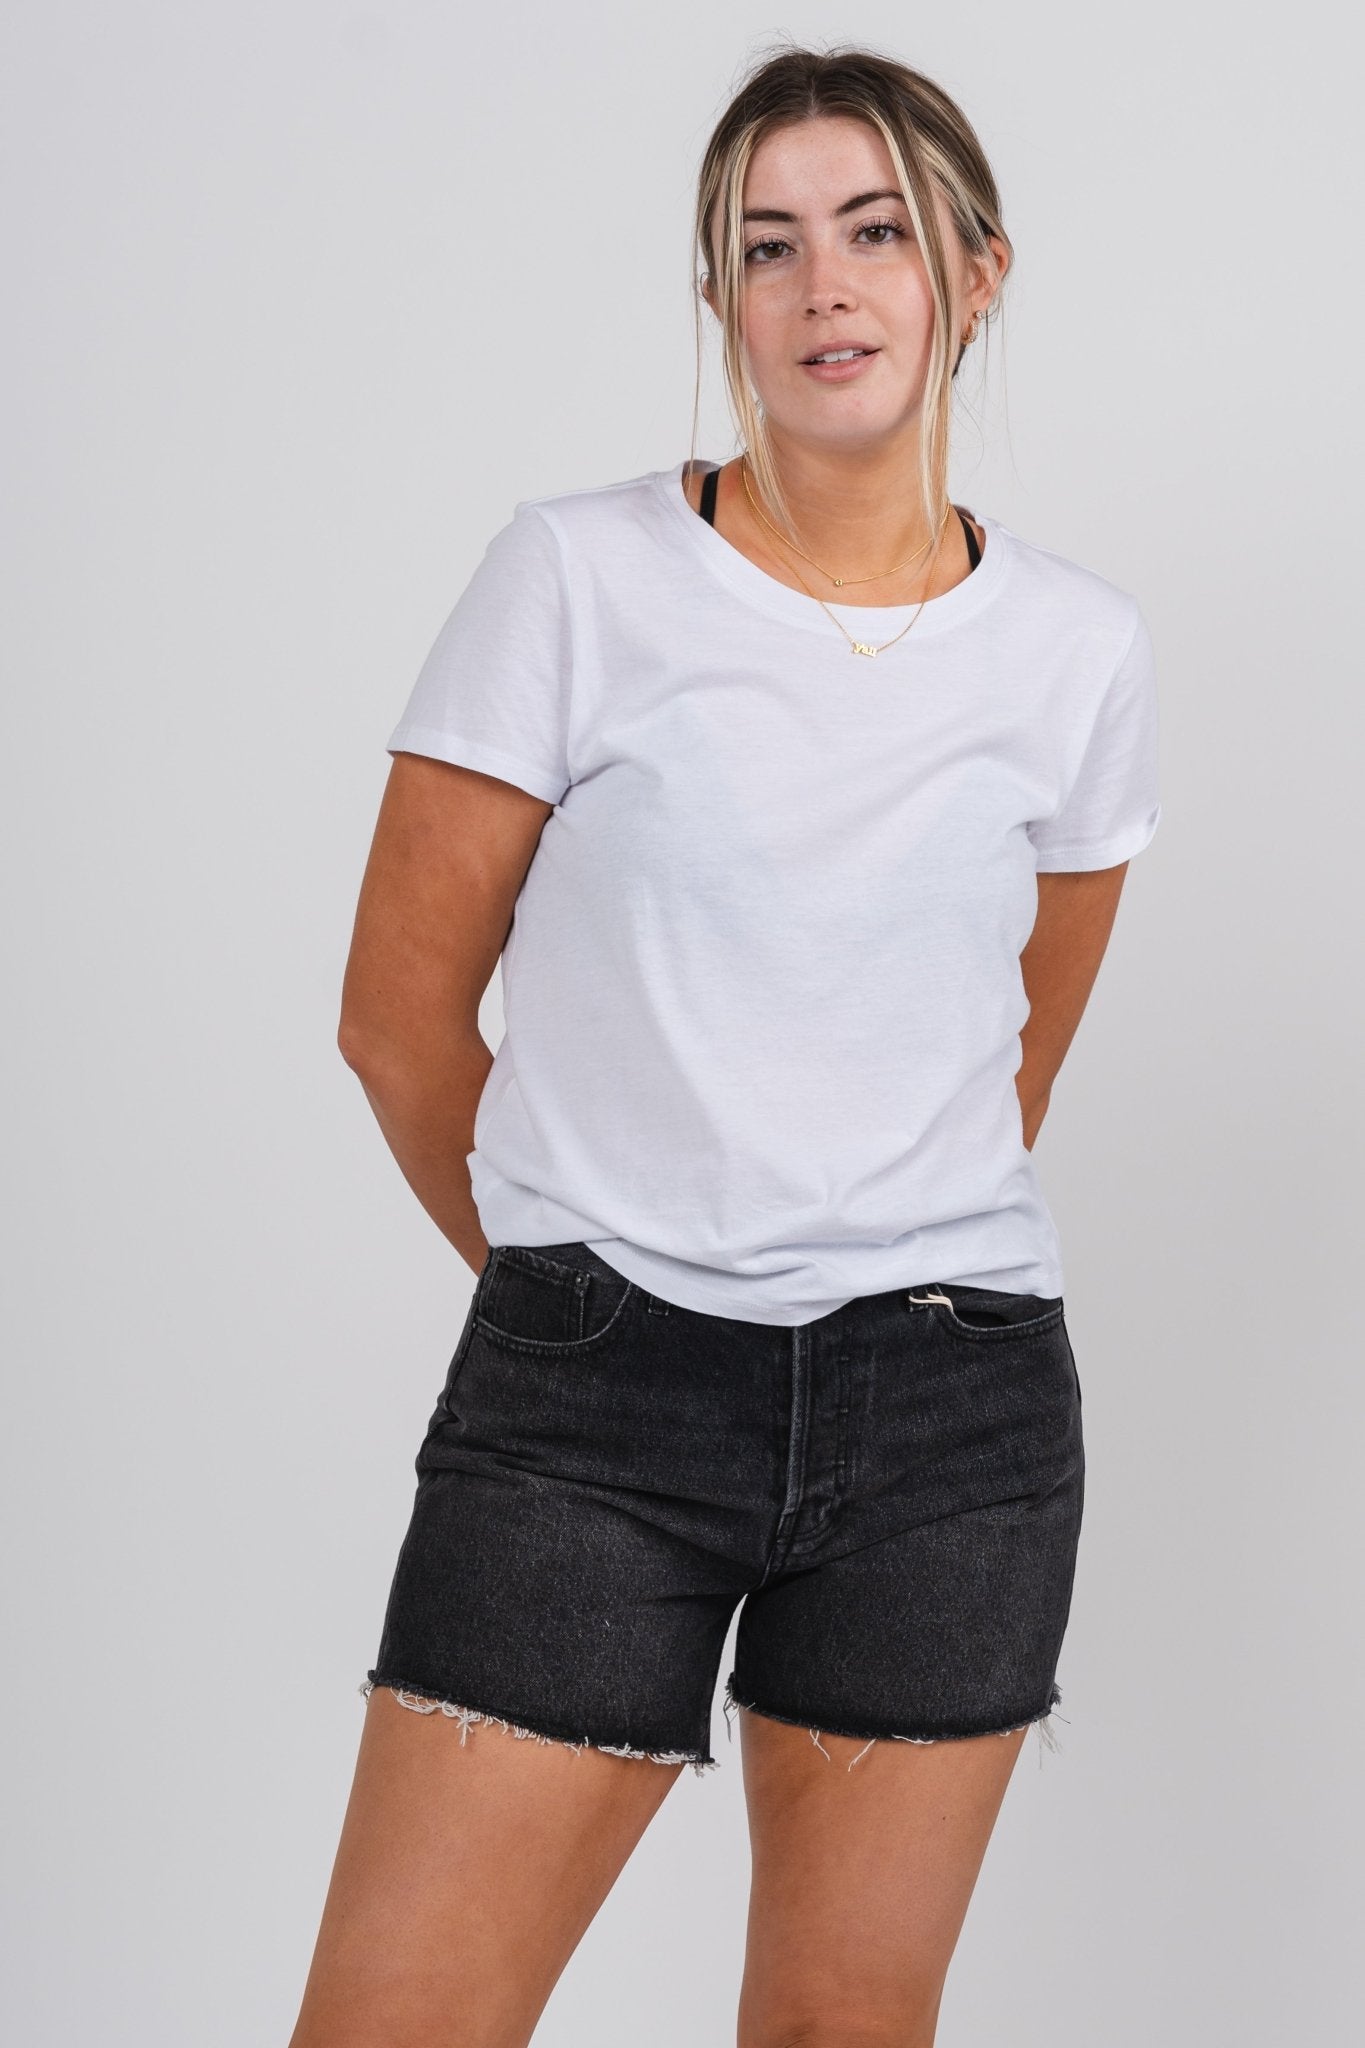 Z Supply everyday high rise denim shorts washed black - Stylish Shorts - Trendy Staycation Outfits at Lush Fashion Lounge Boutique in Oklahoma City